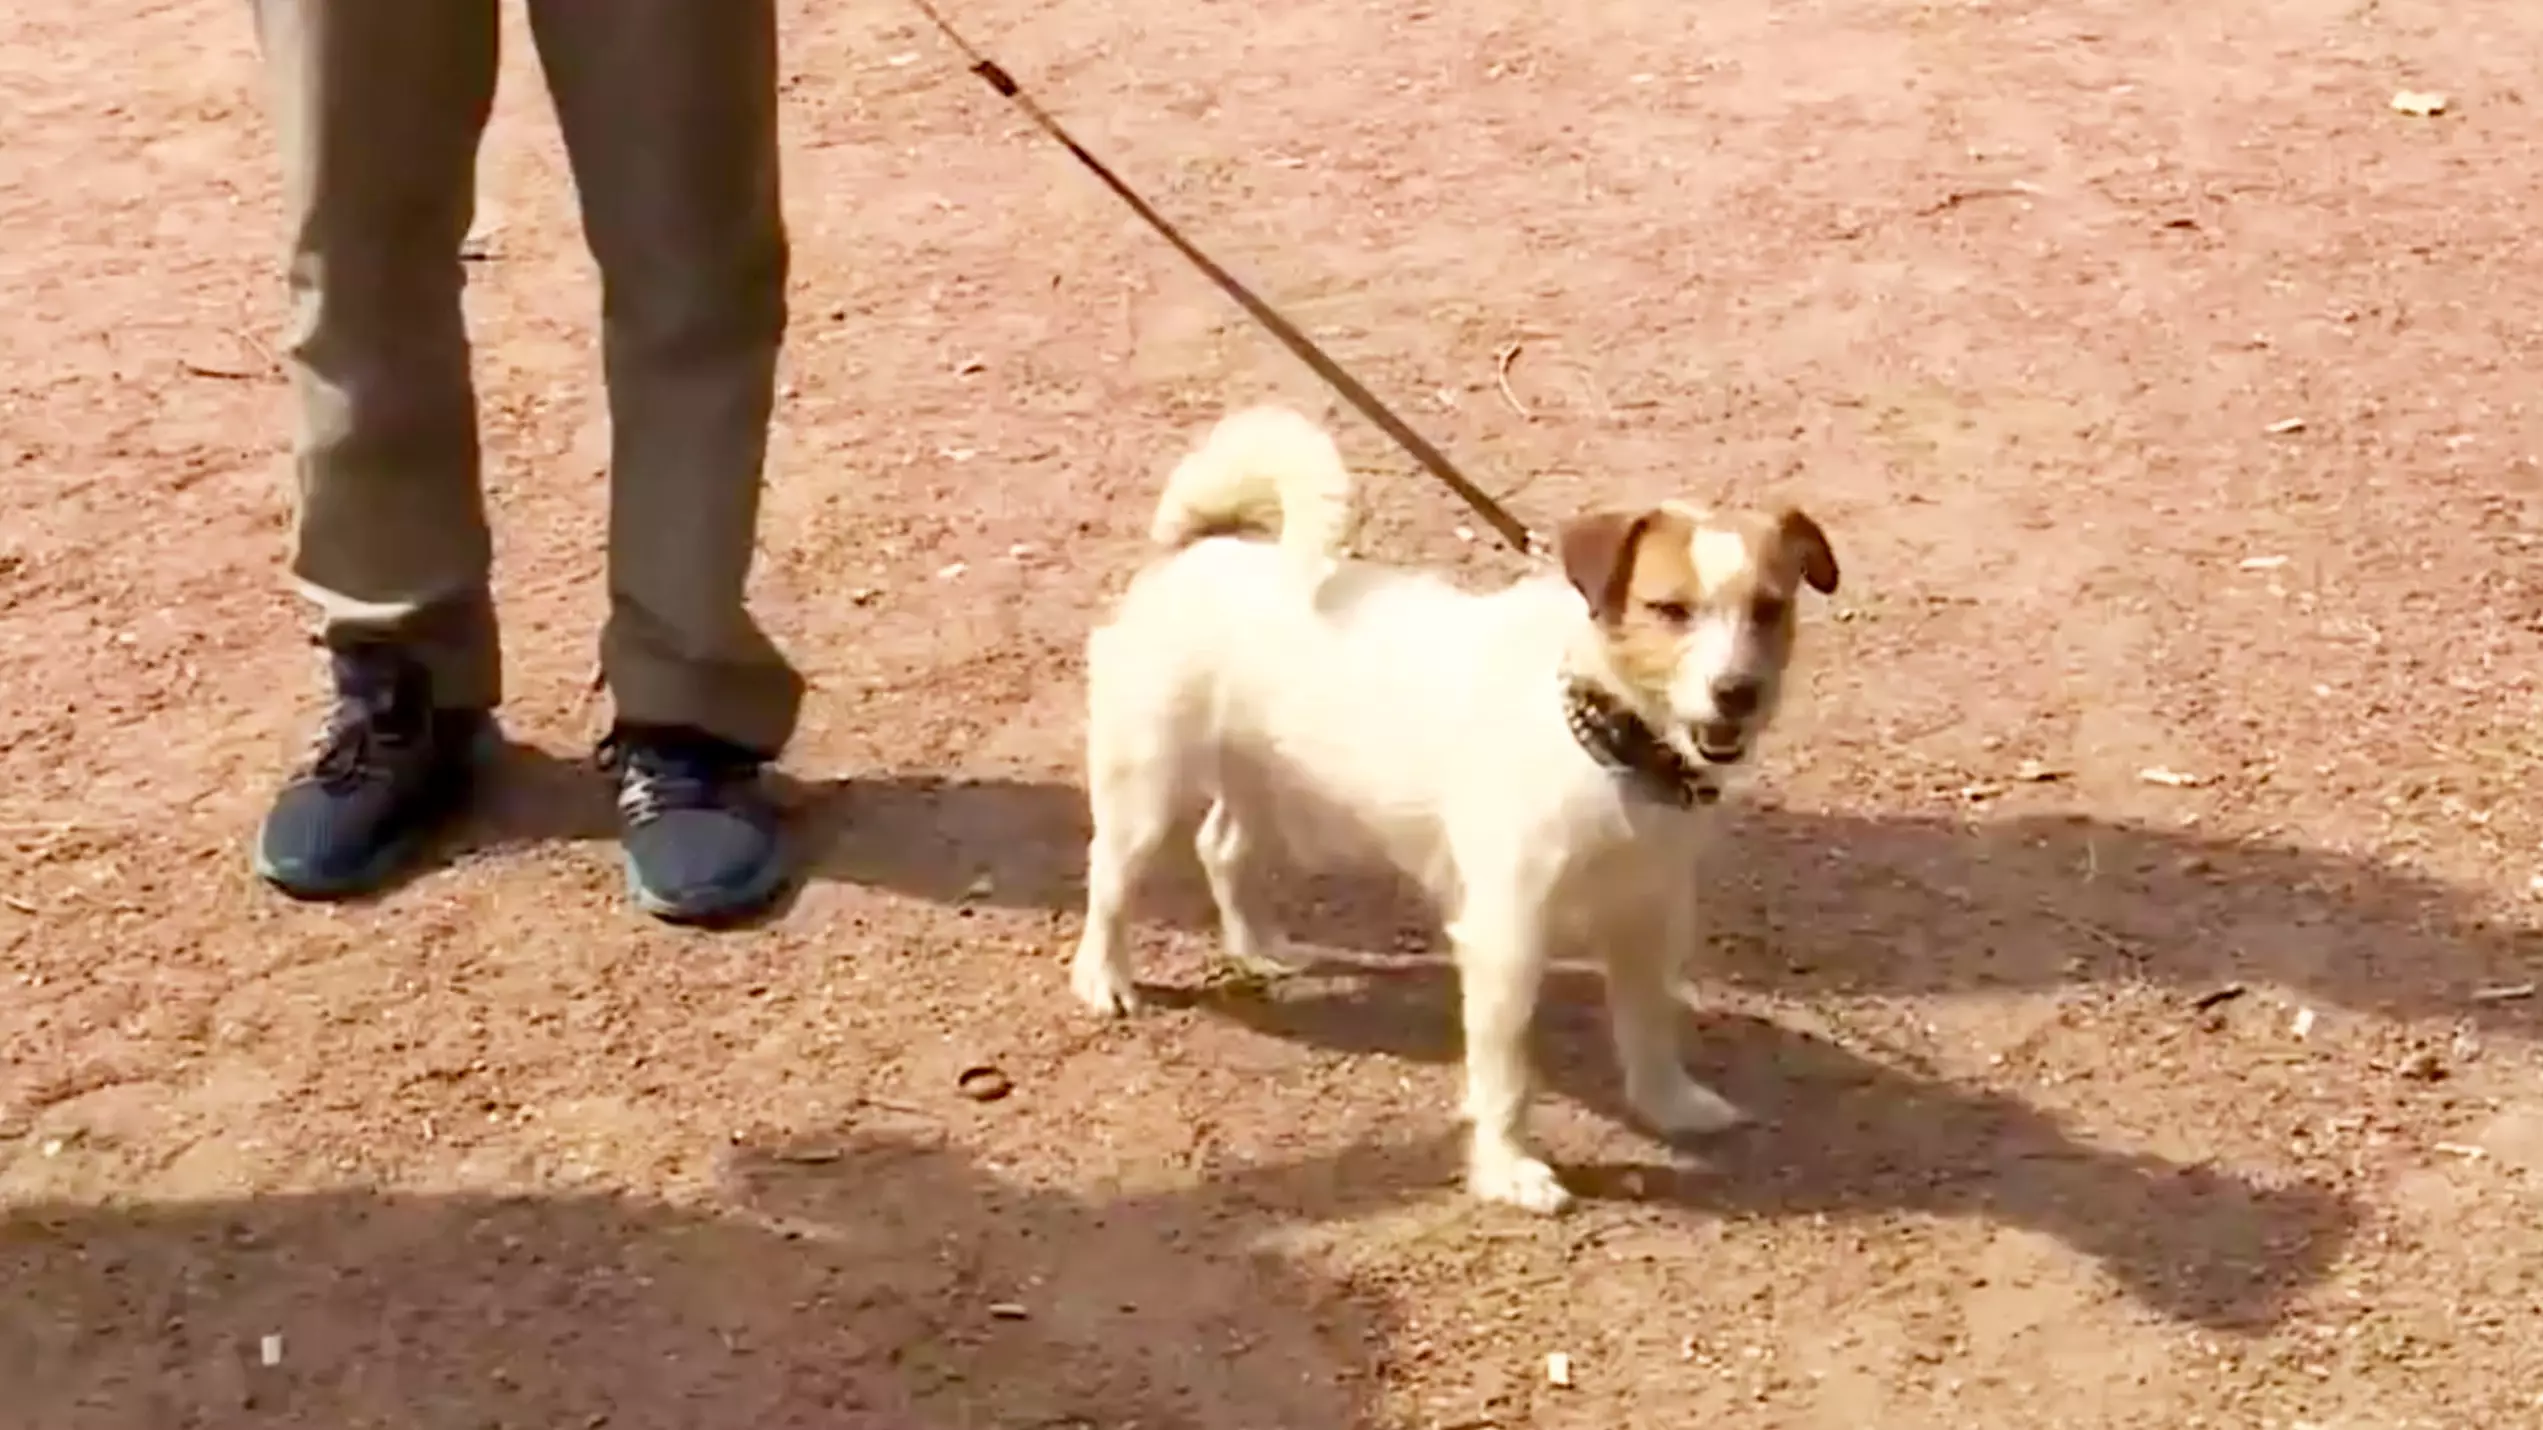 Hero Jack Russell Finds Tiny Baby Abandoned In Bushes